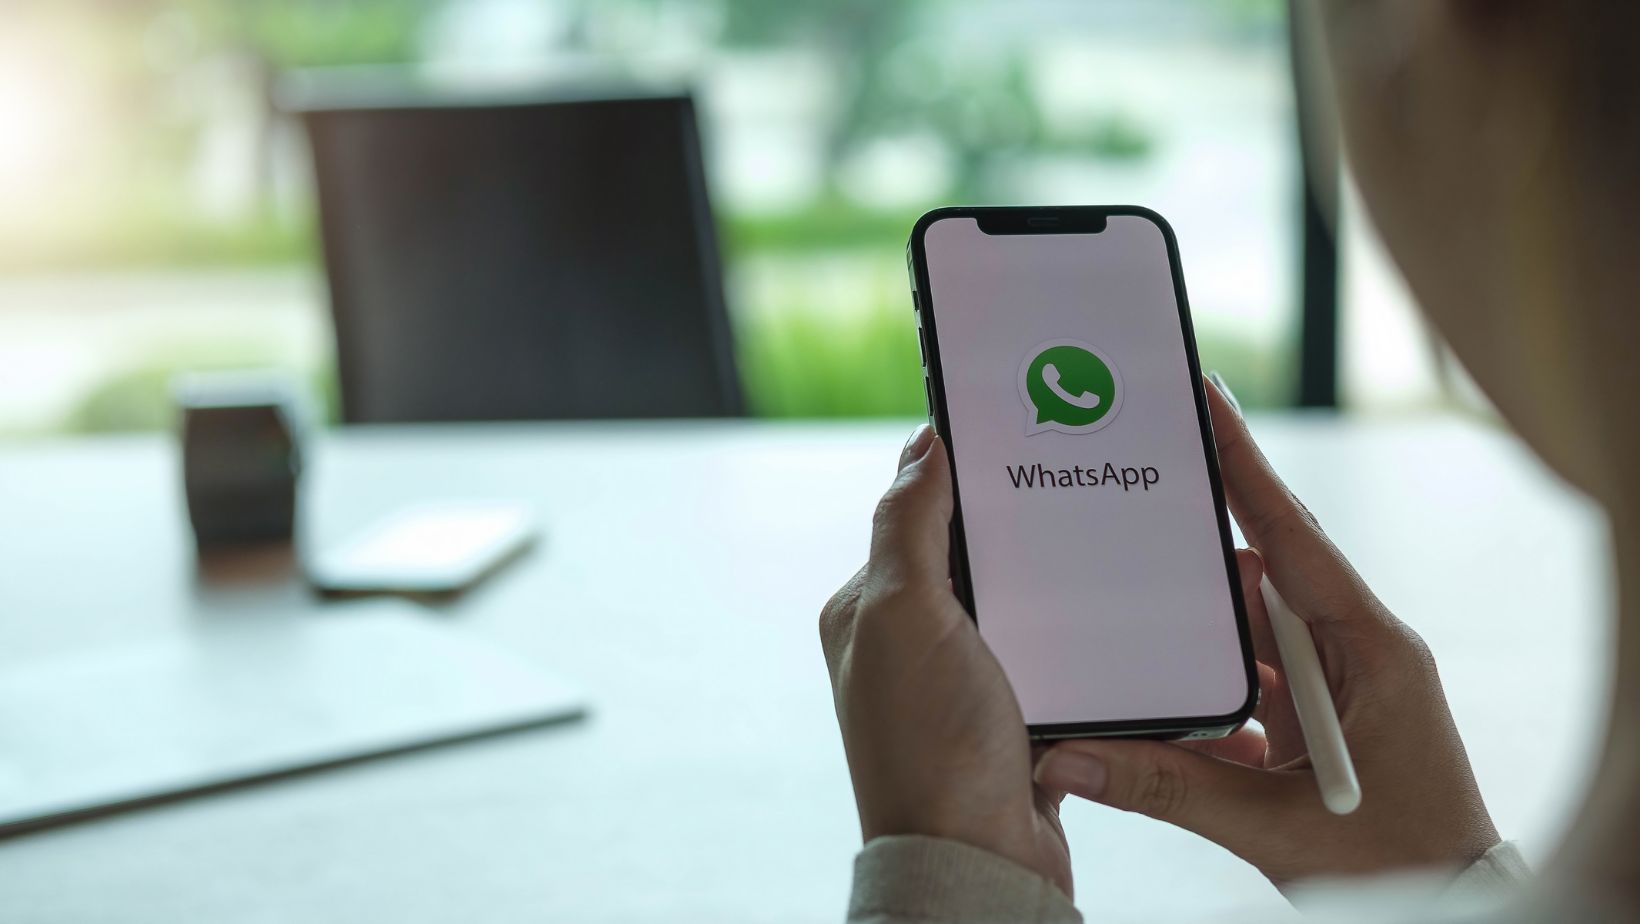 Chinese on Tinder Asking for WhatsApp – A Guide to Navigating Online Connections